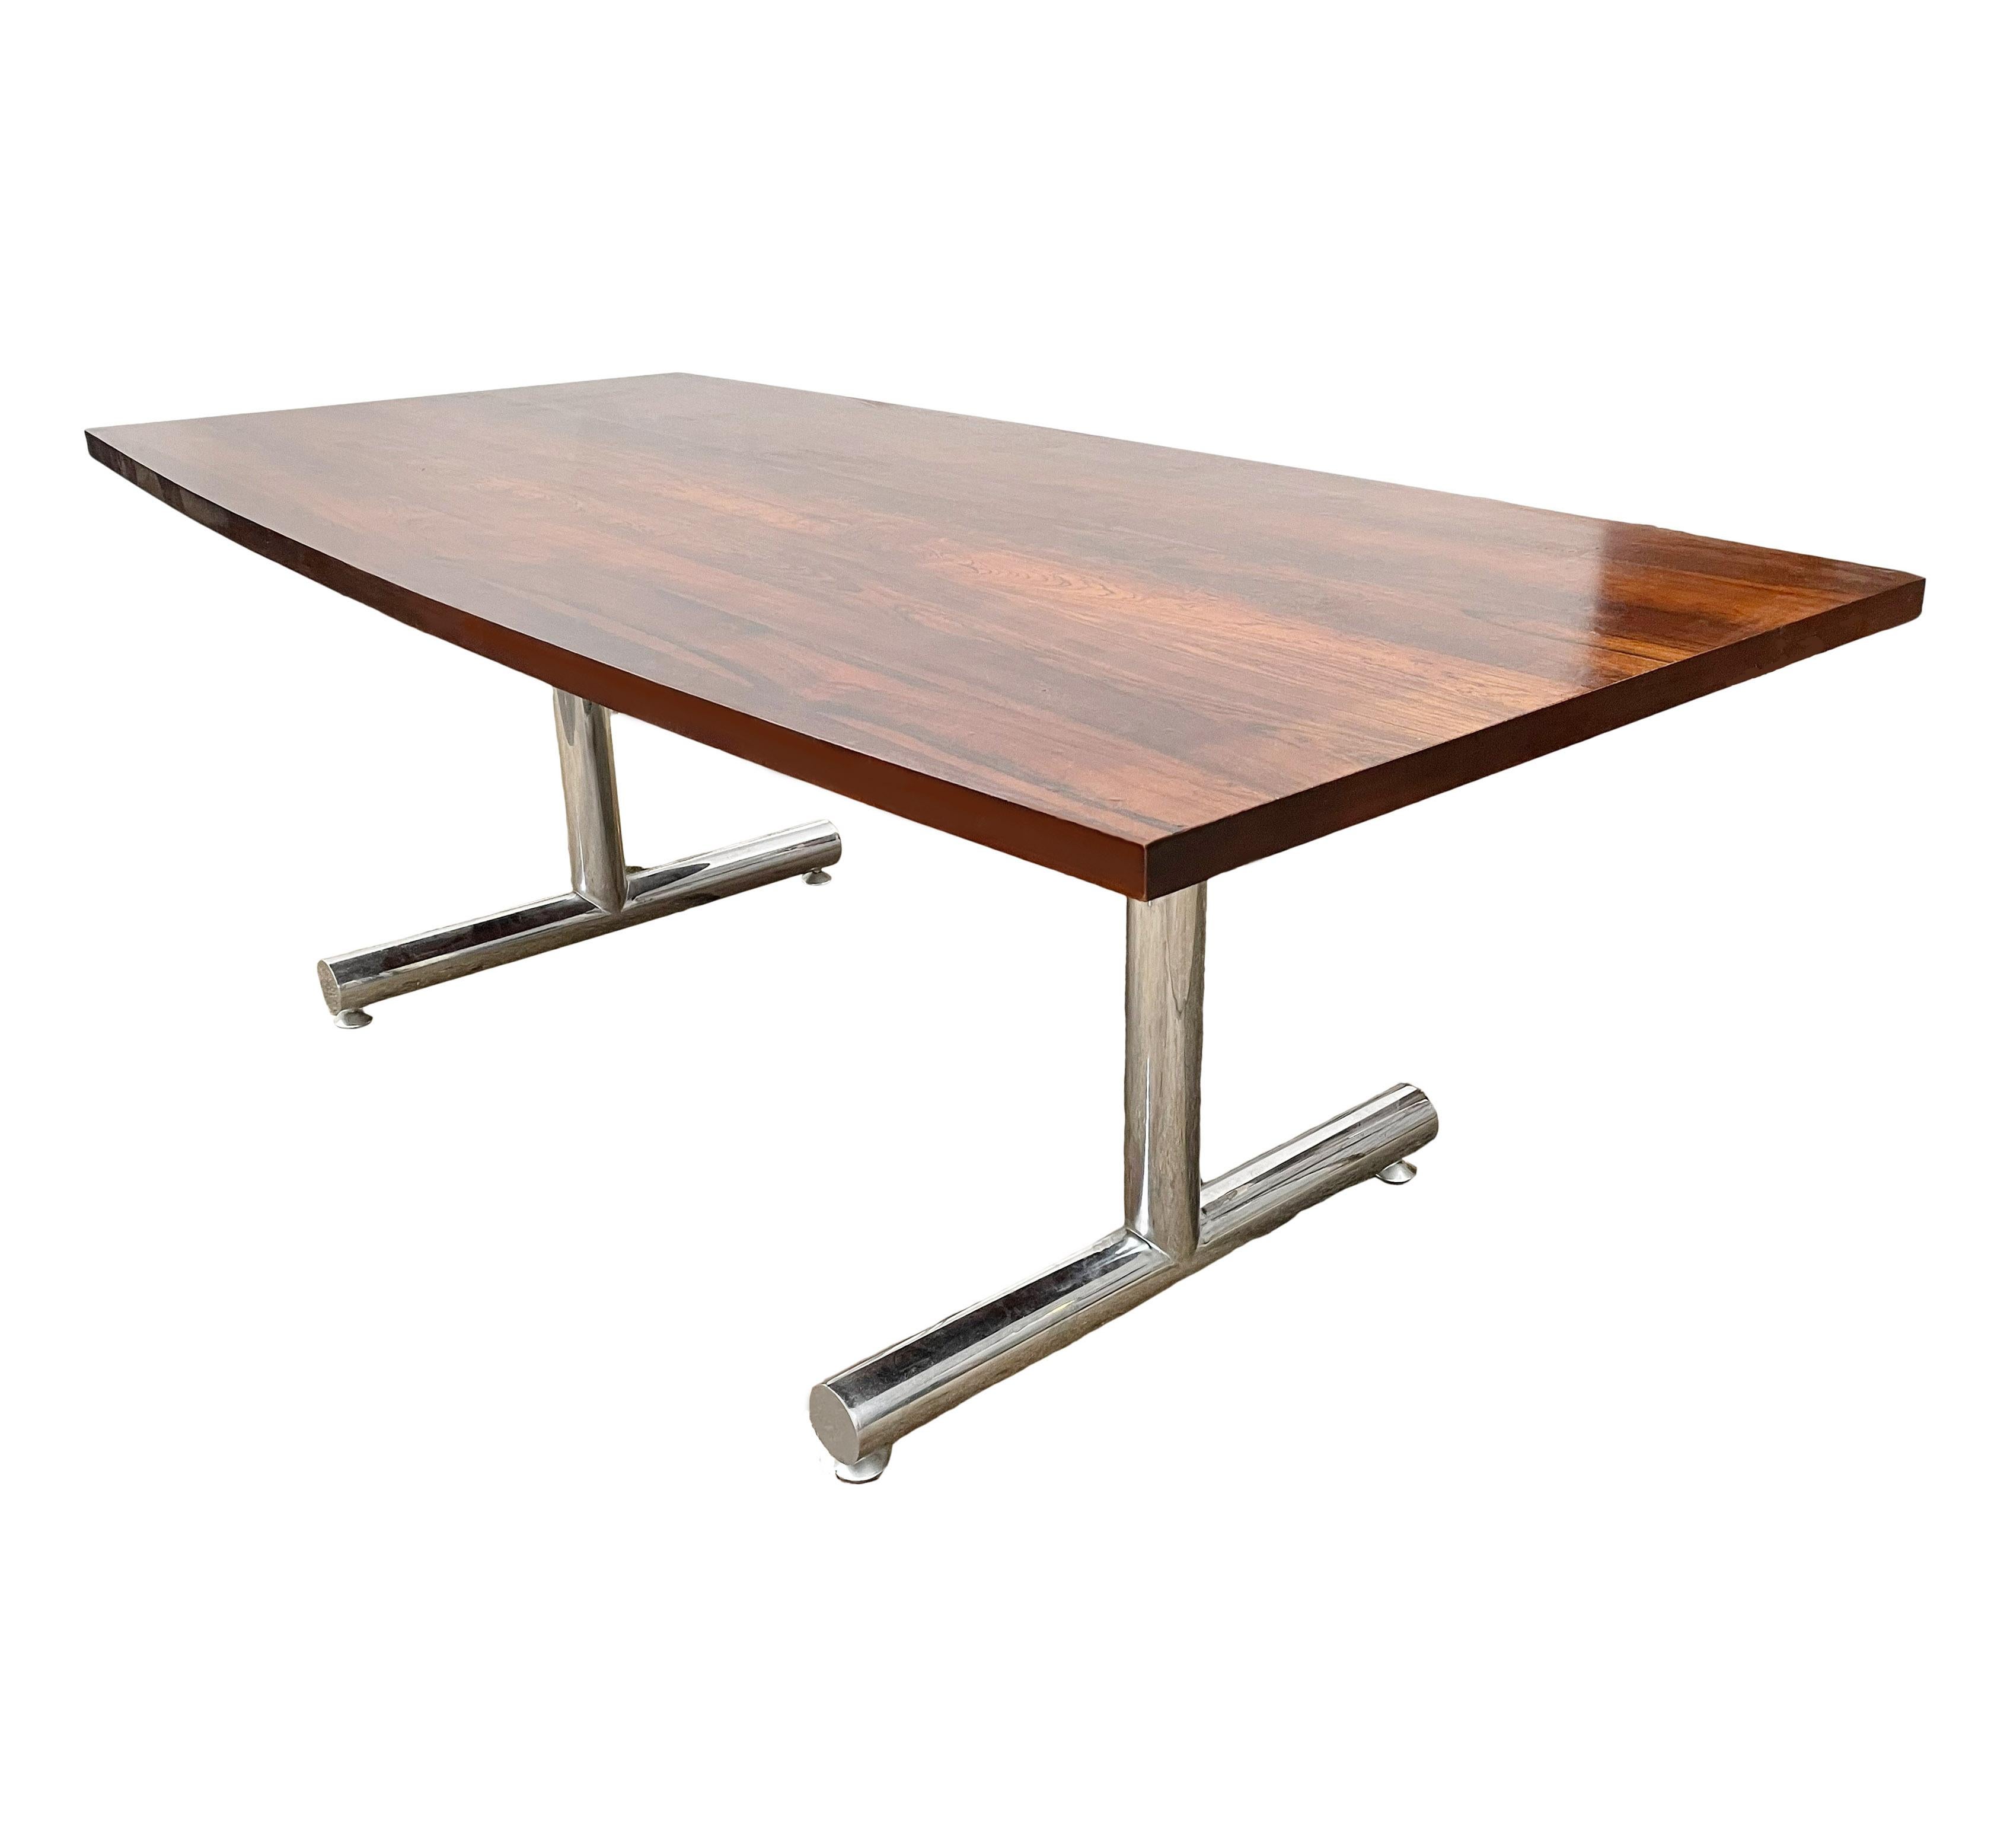 A beautiful clean line design from the 1970s. This table consists of a rectangular rosewood top with bowed sides, and thick tubular chrome legs. Clean and ready to use condition.